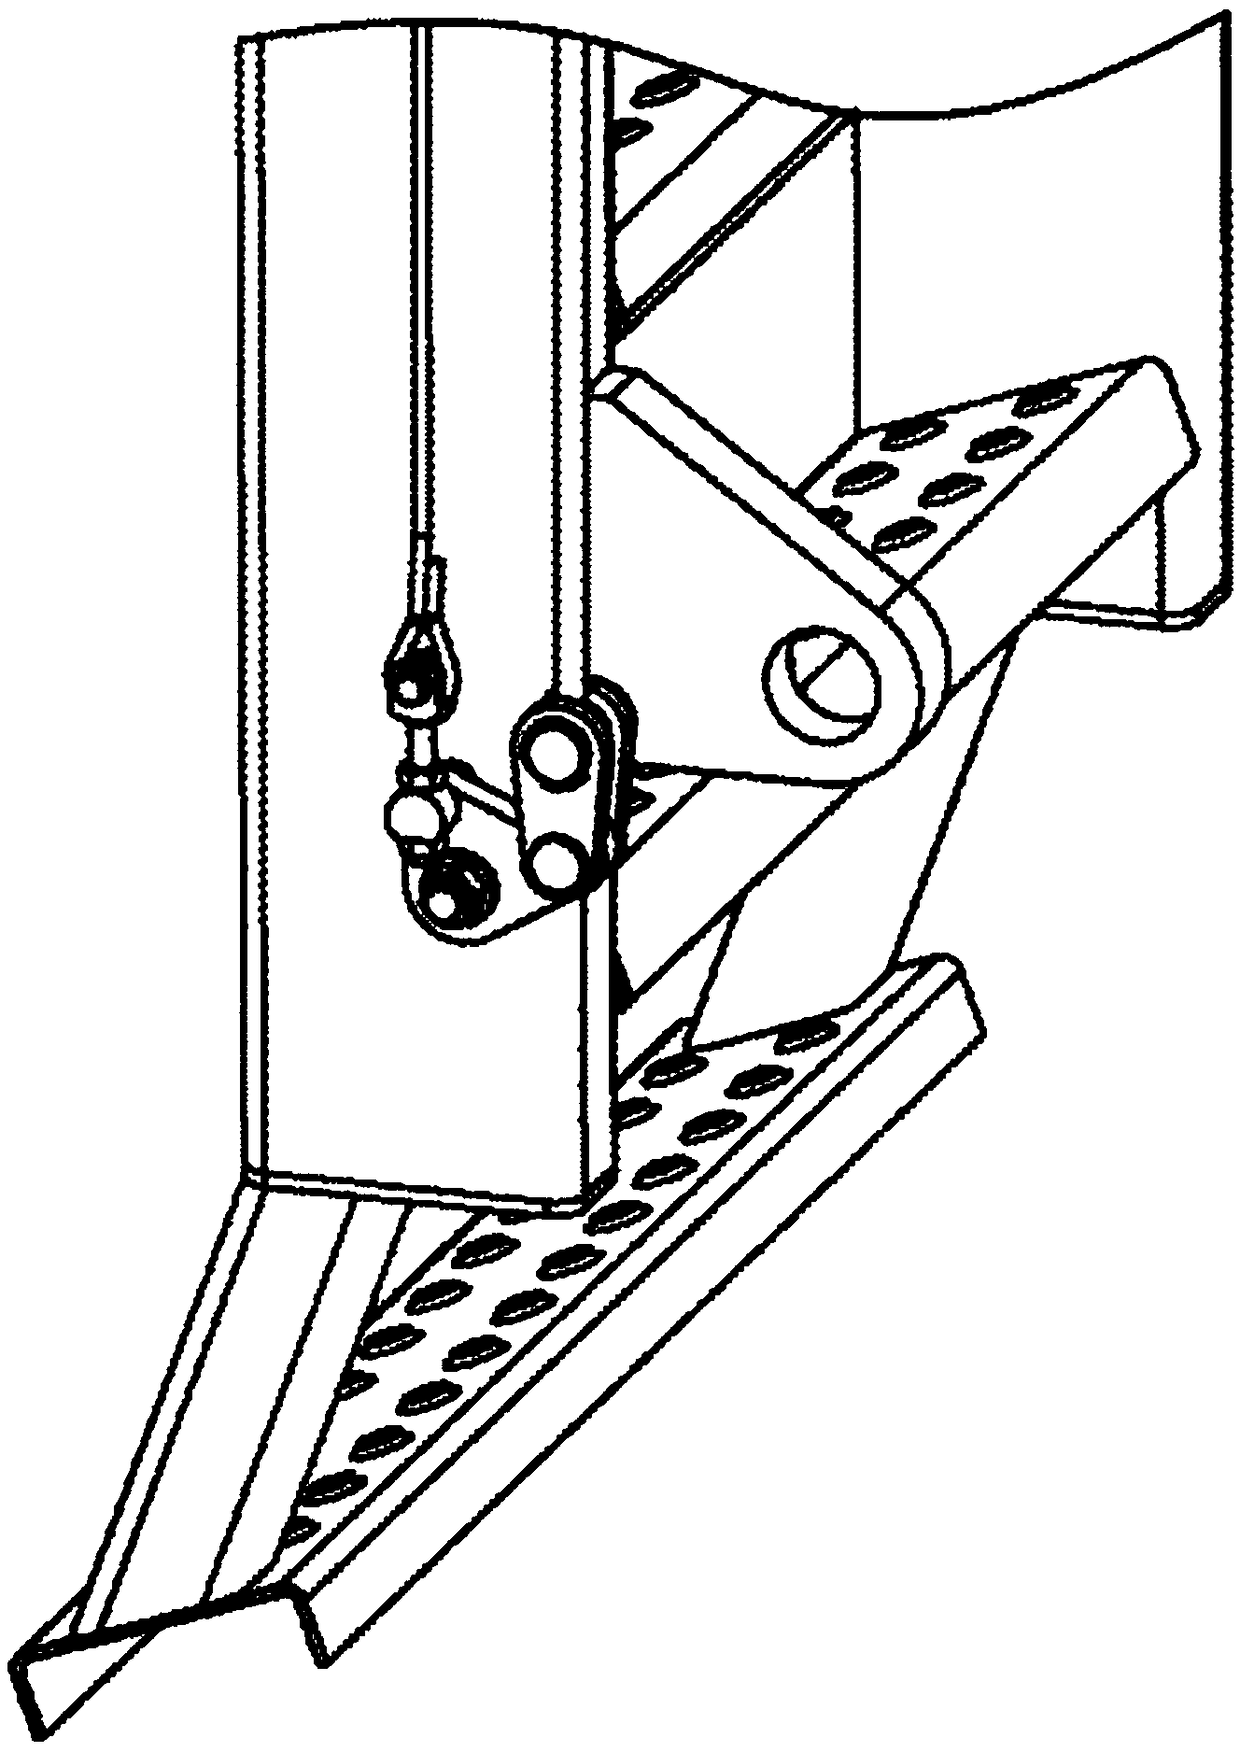 Boarding ladder with safety locking mechanism and large excavator